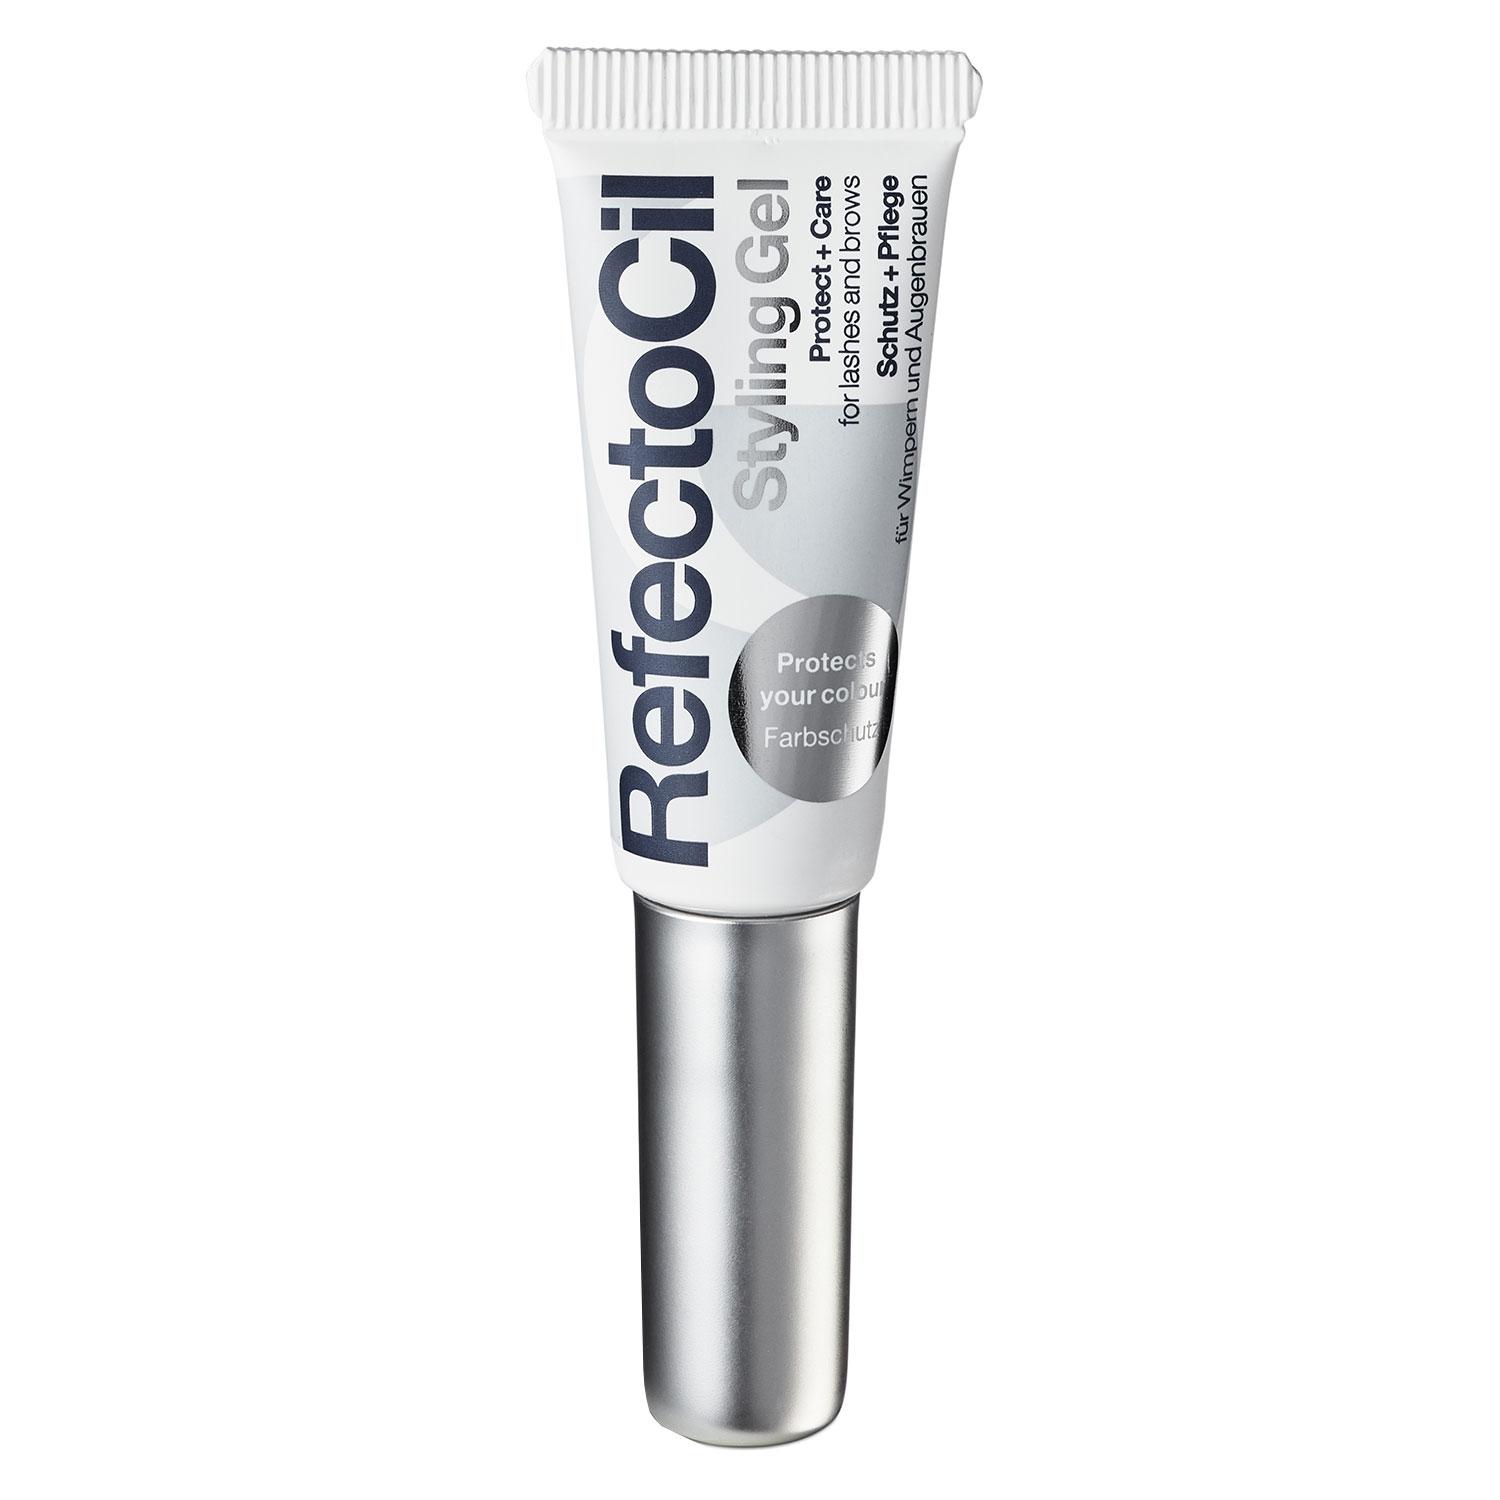 RefectoCil - Styling Gel Protect & Care for Lashes and Brows